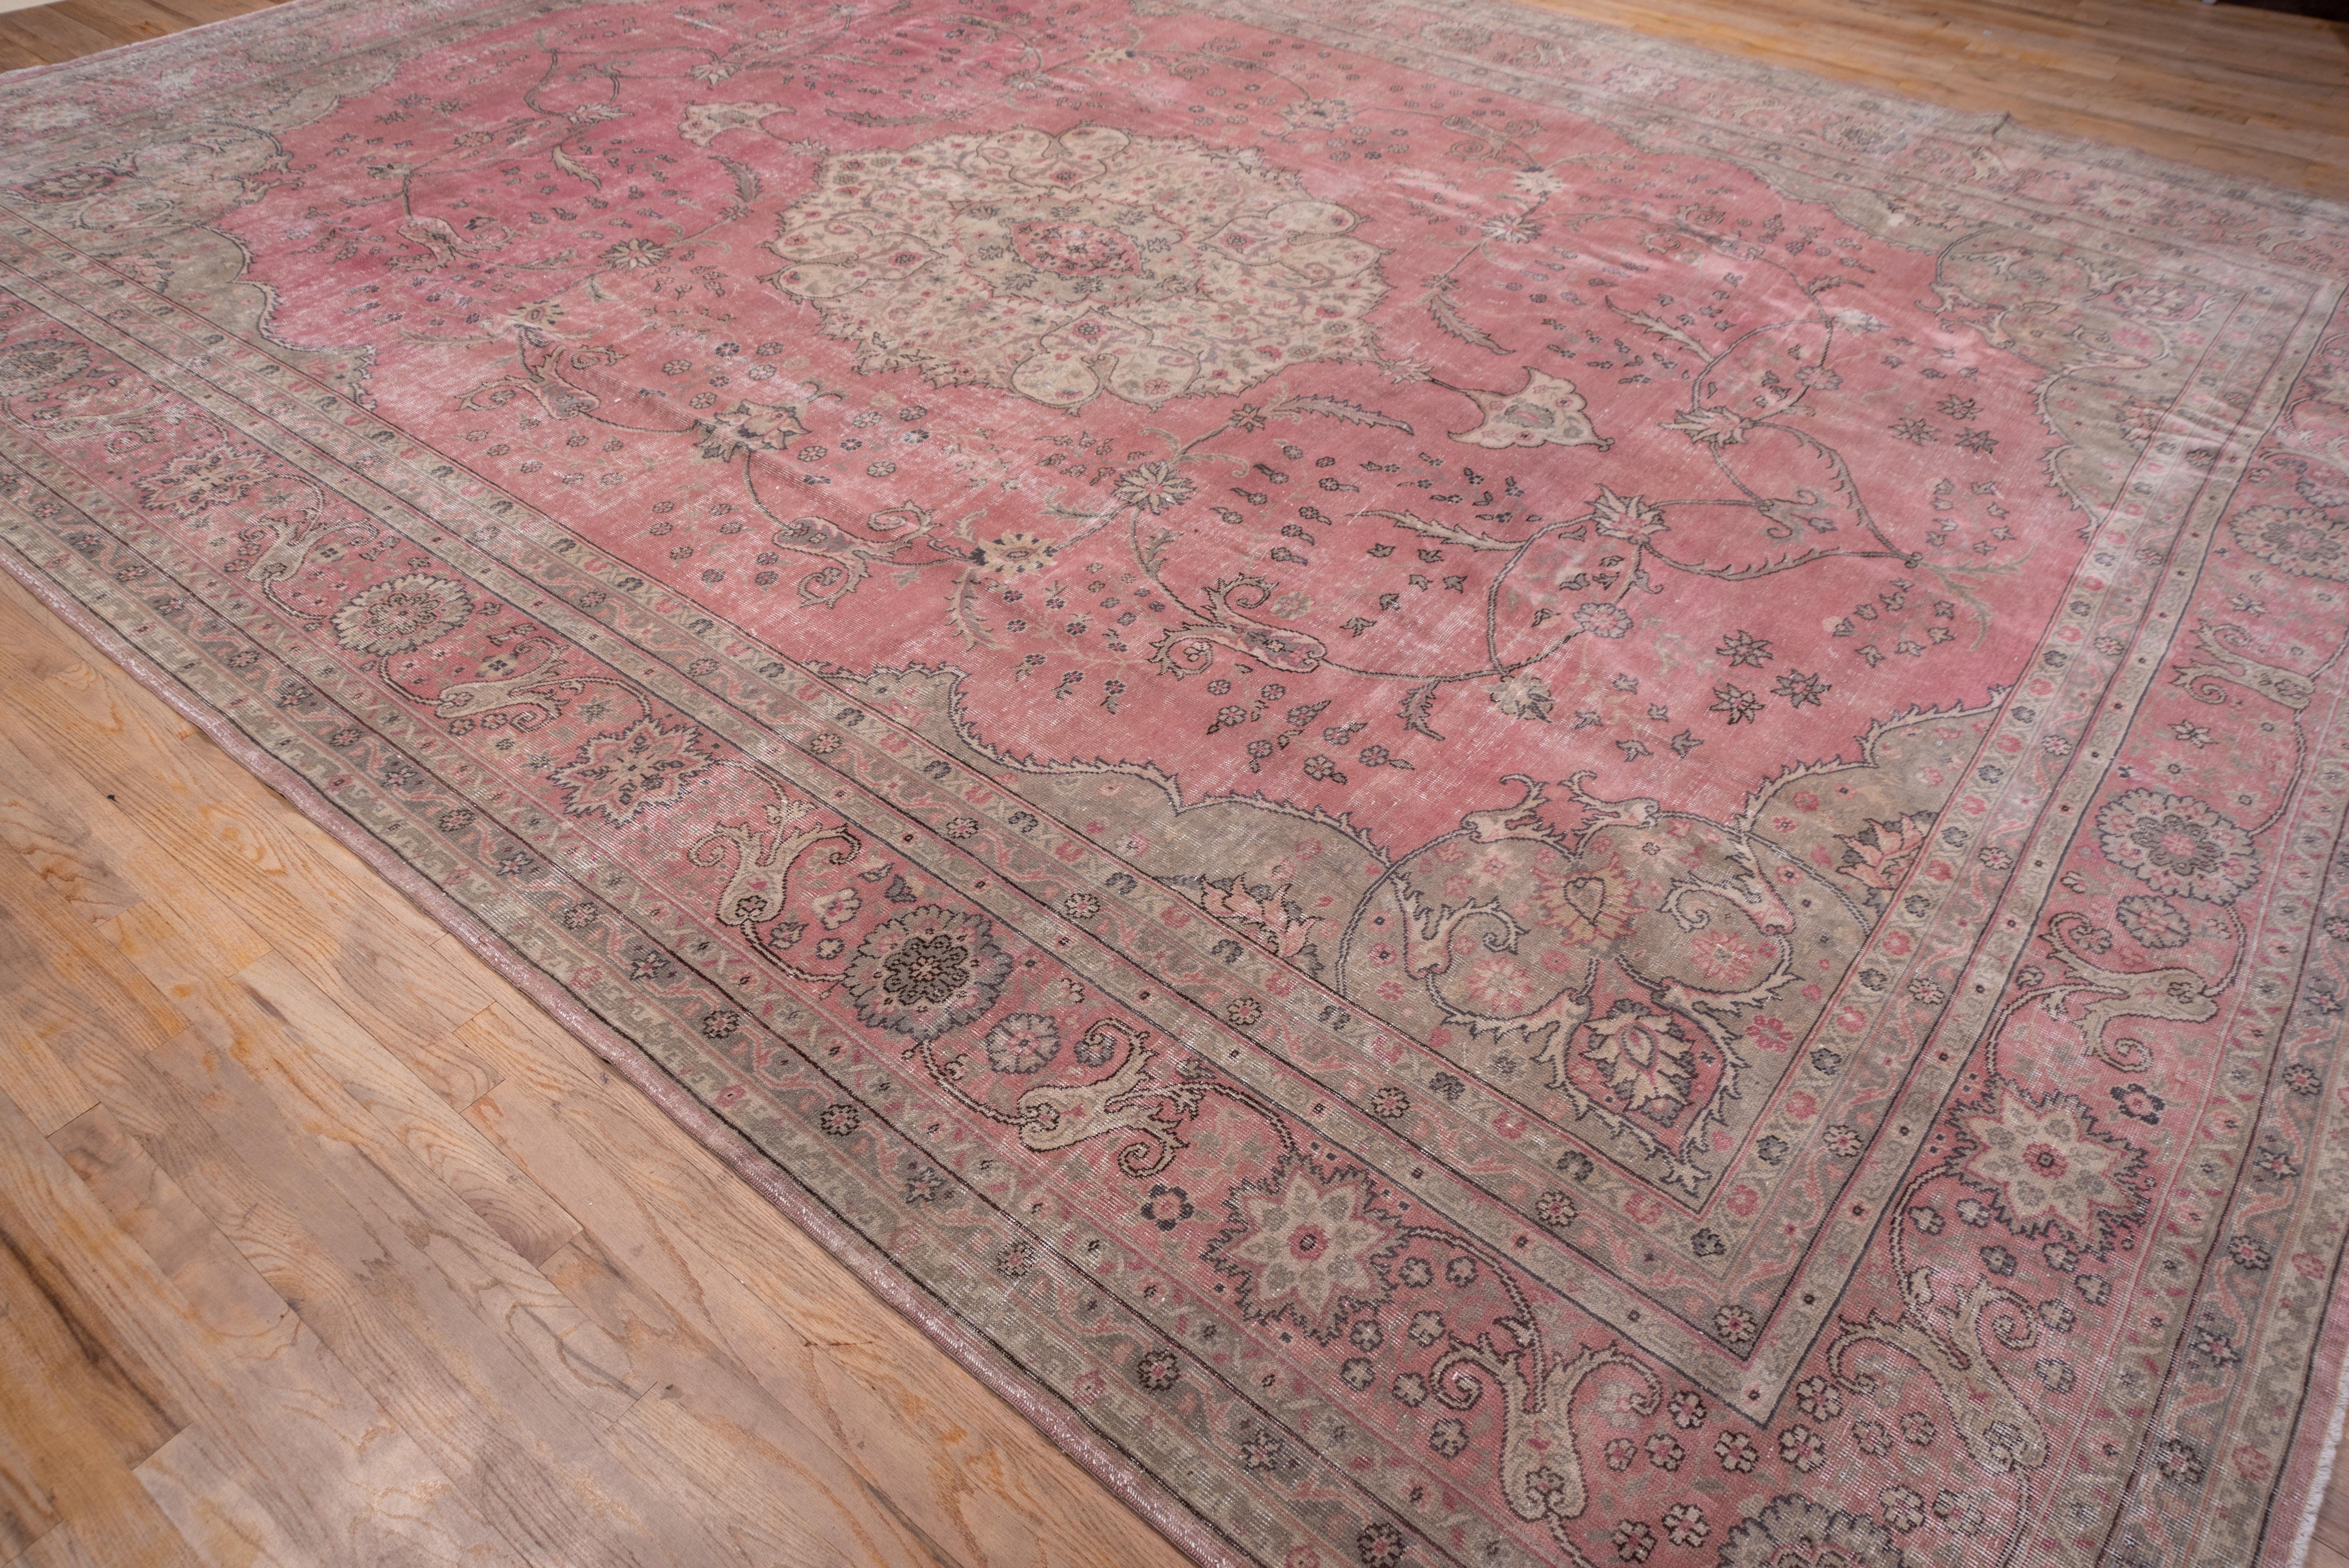 Hand-Knotted Pink Antique Turkish Sivas Large Rug, Tabriz Style, circa 1920s For Sale